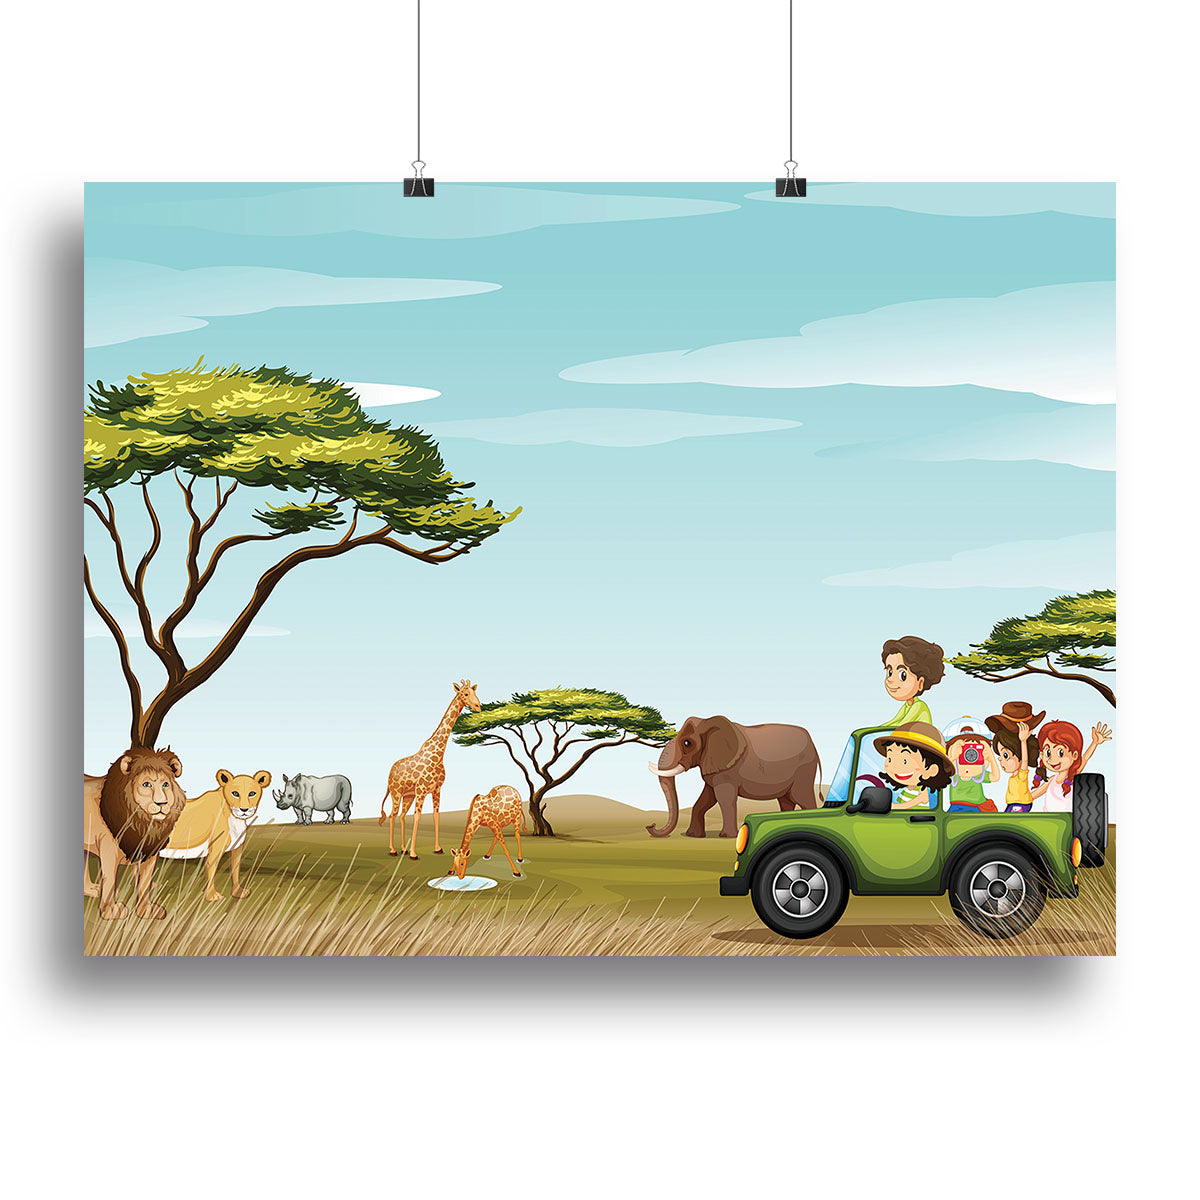 Roadtrip in the field full of animals Canvas Print or Poster - Canvas Art Rocks - 2